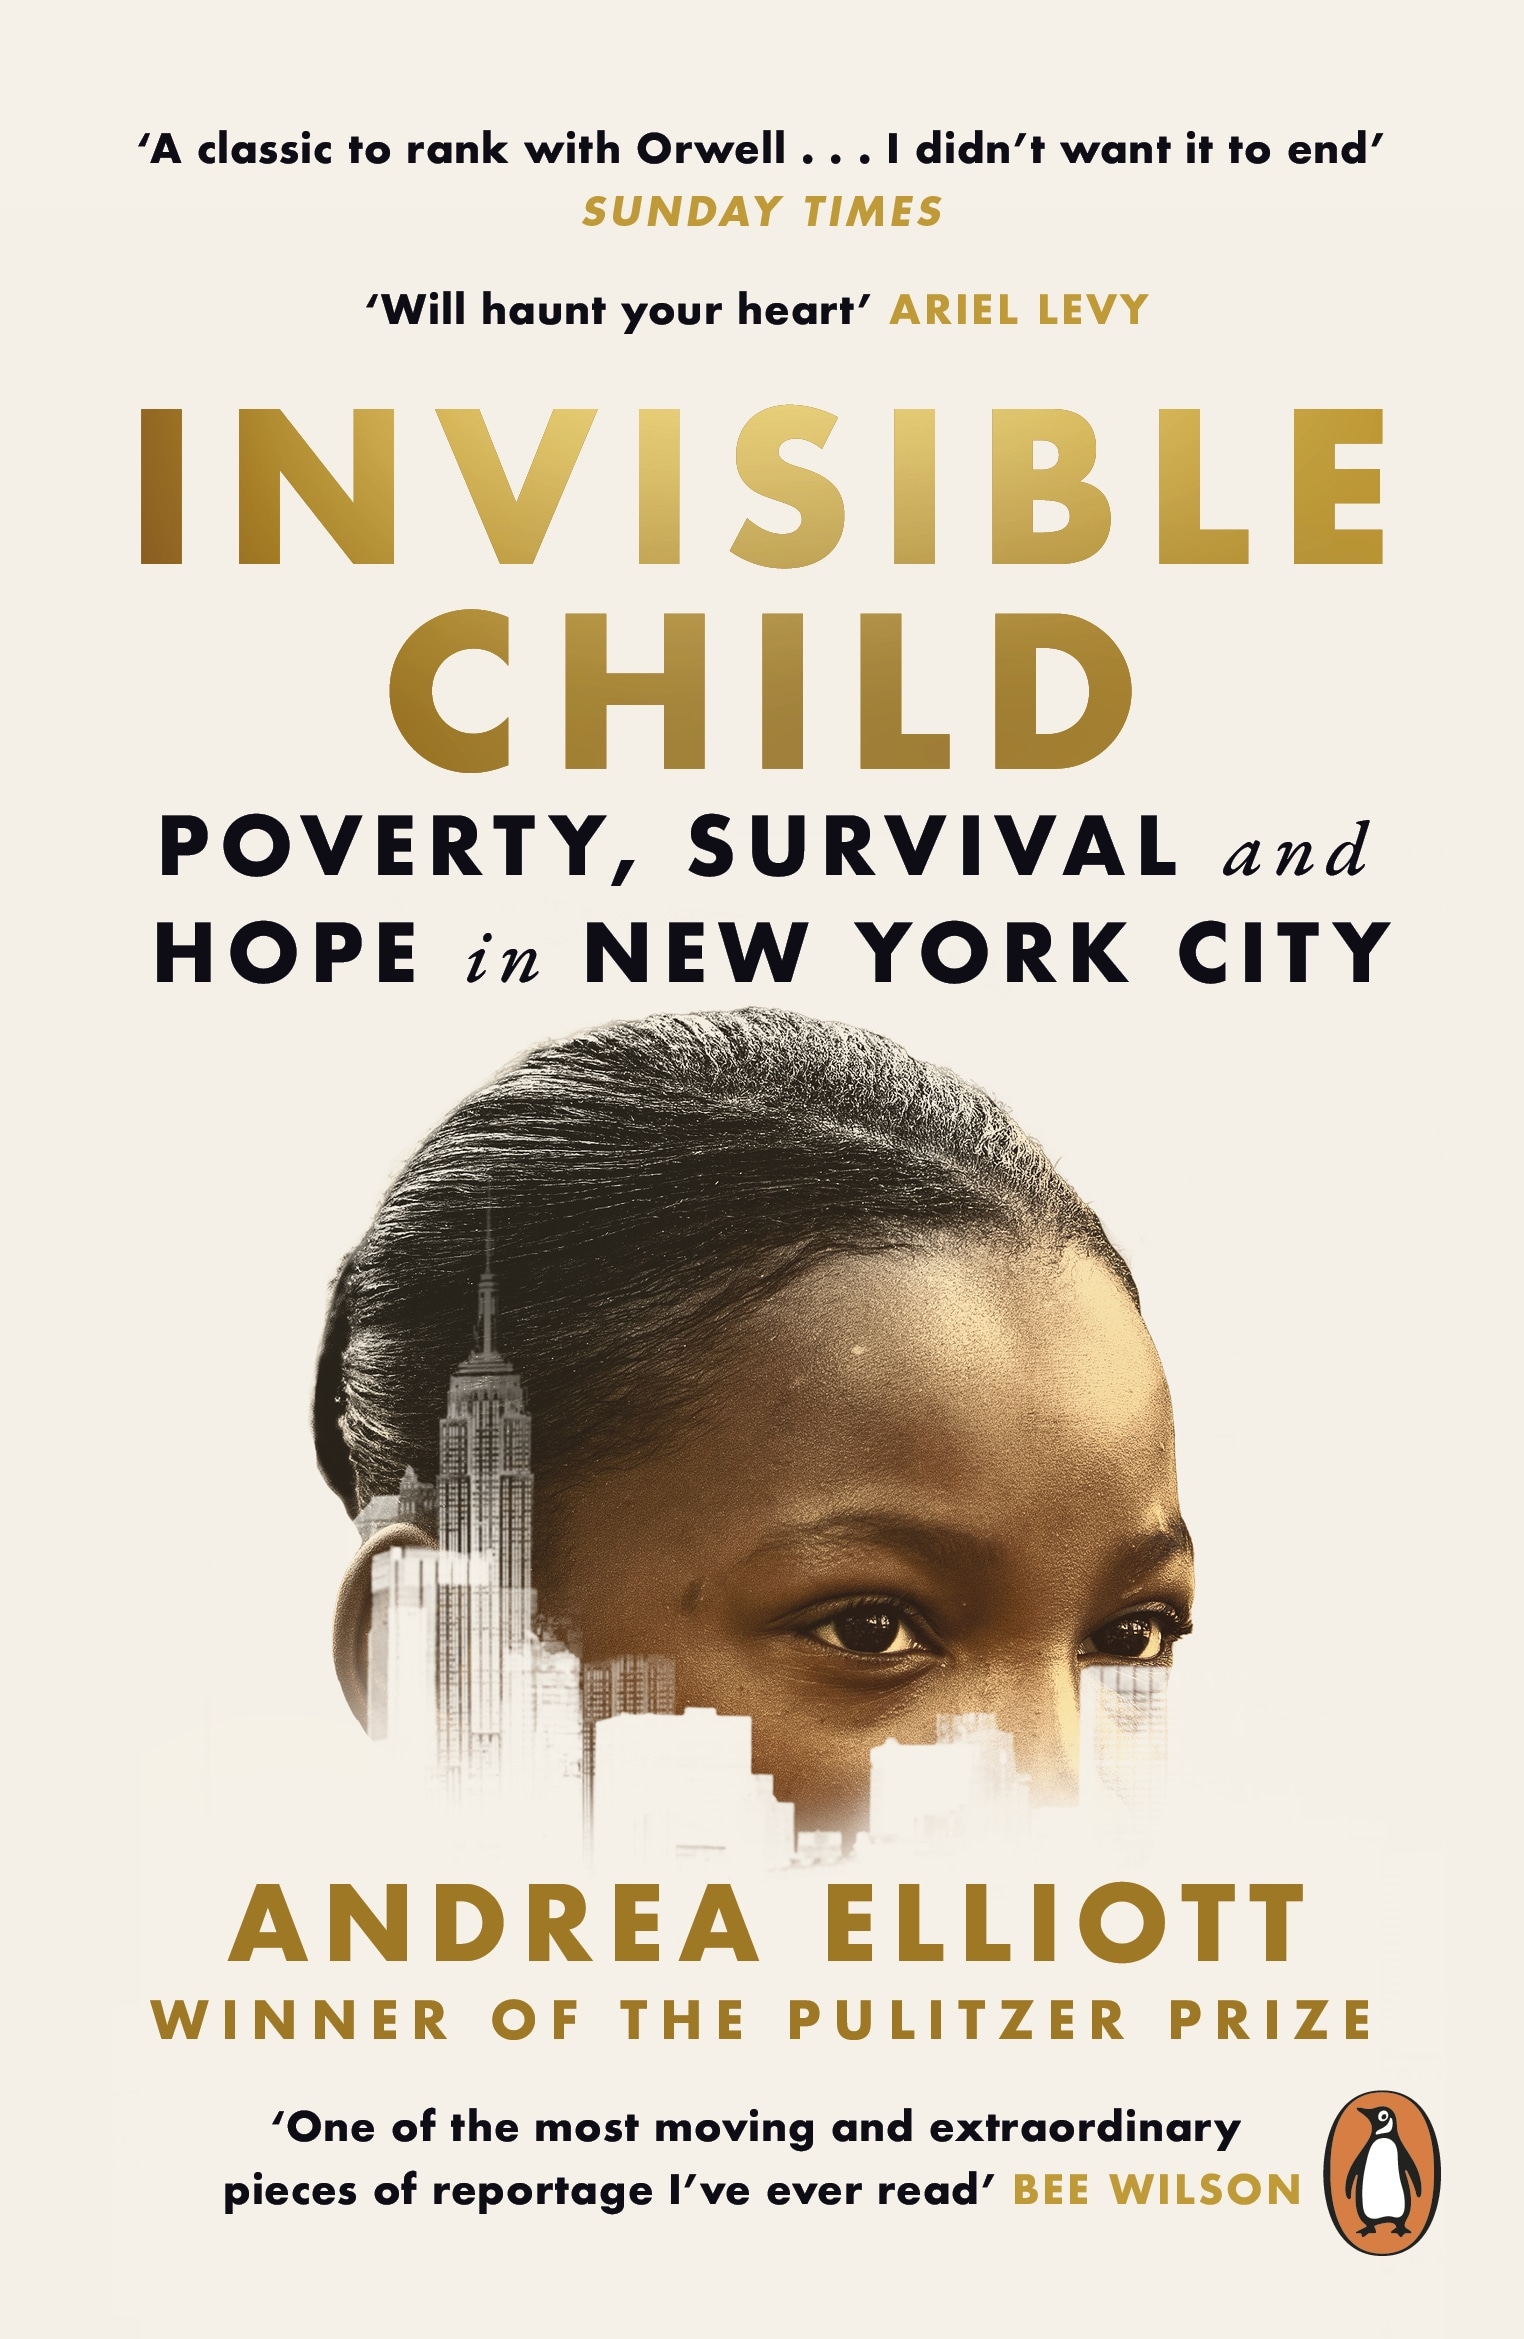 Book “Invisible Child” by Andrea Elliott — February 9, 2023